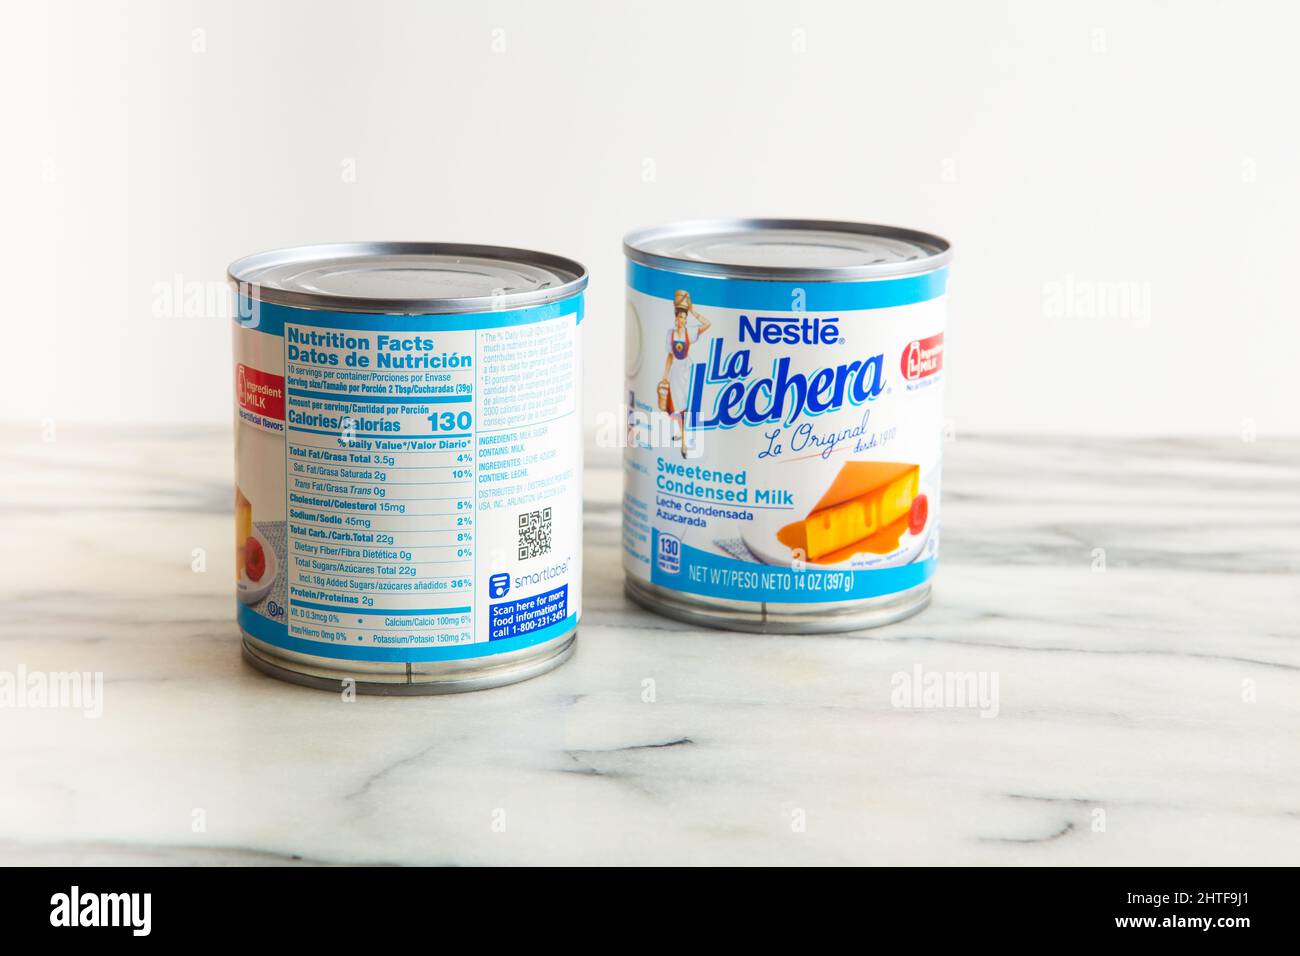 2 tins of Nestle La Lechera sweetened condensed milk showing front and back nutrition facts also known as evaporated milk. Stock Photo